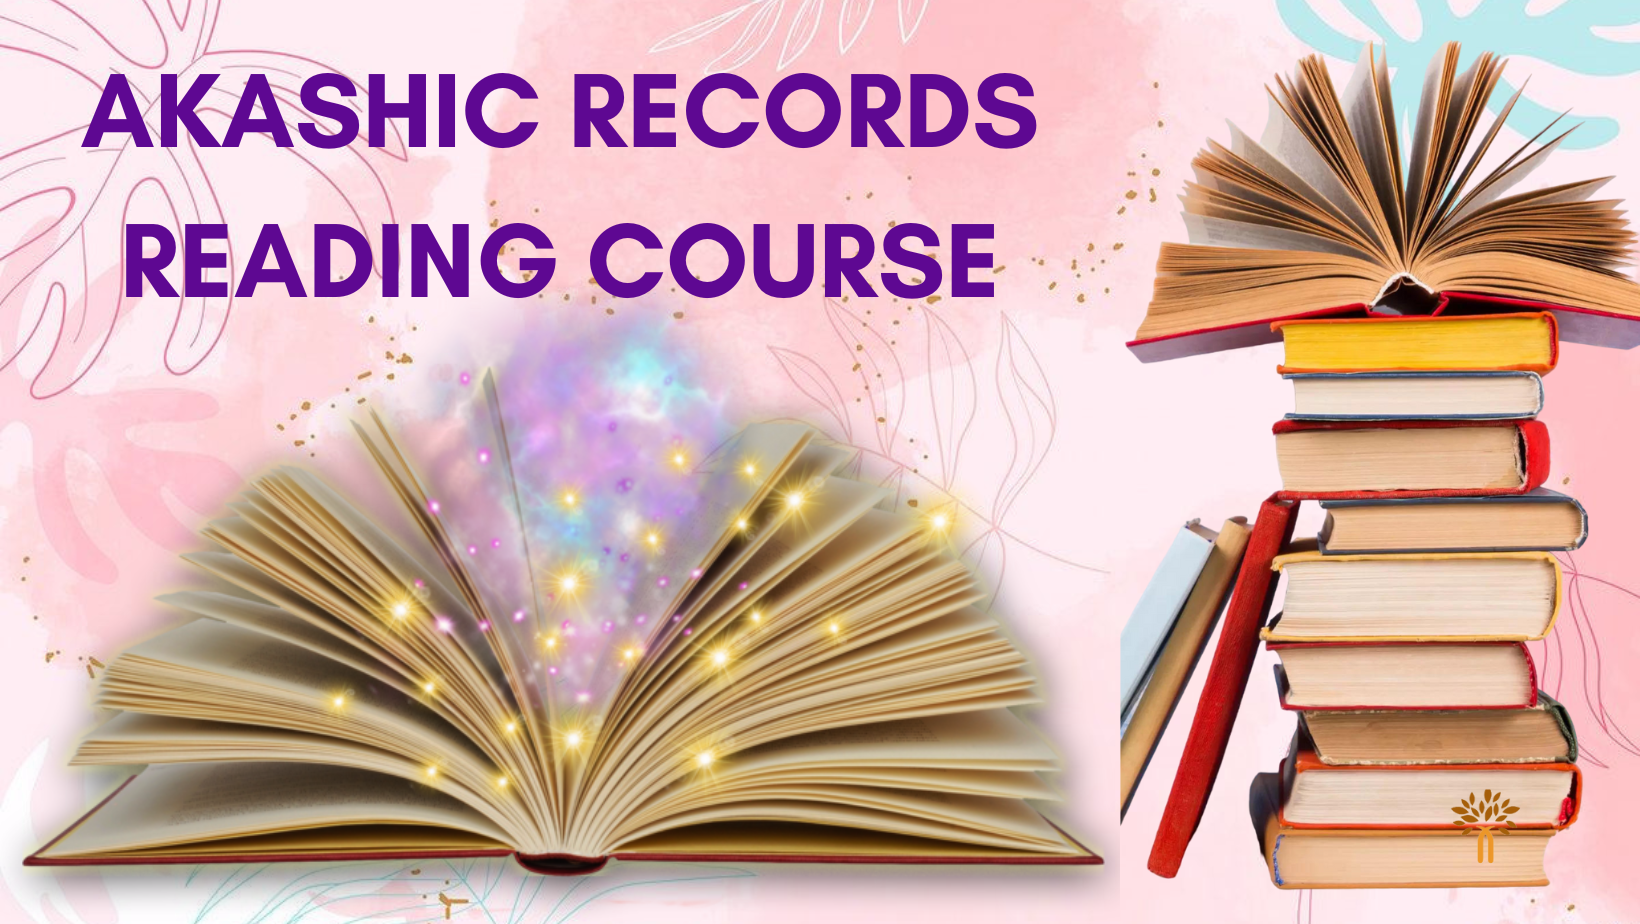 Akashic Records Reading Course in Chennai